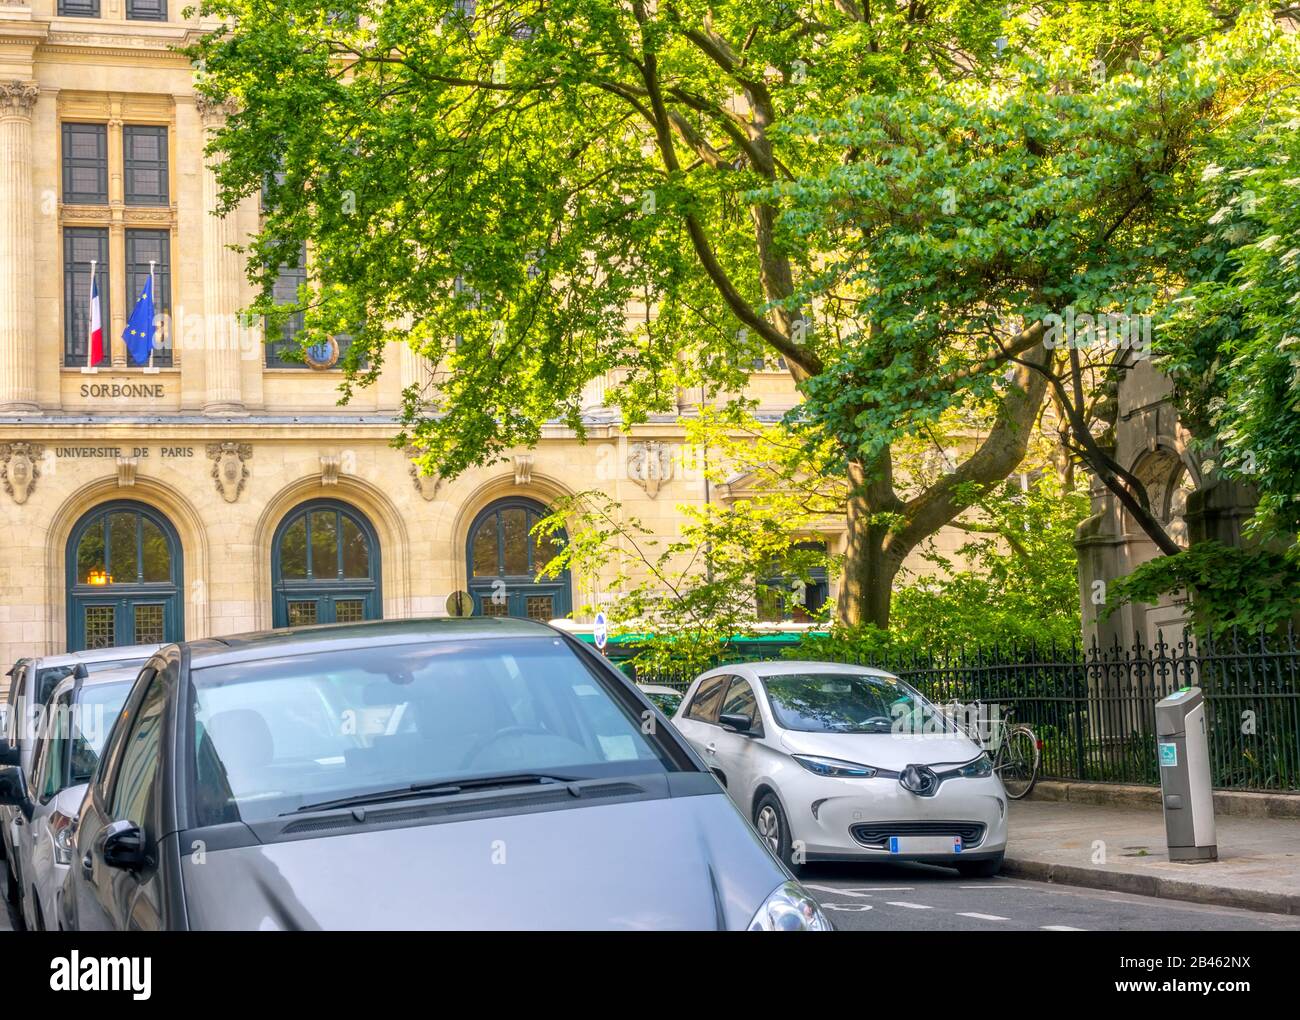 France. Summer sunny day in Paris. Green garden near the University of Sorbonne. Several cars are parked on a narrow street. Electric car connected to Stock Photo